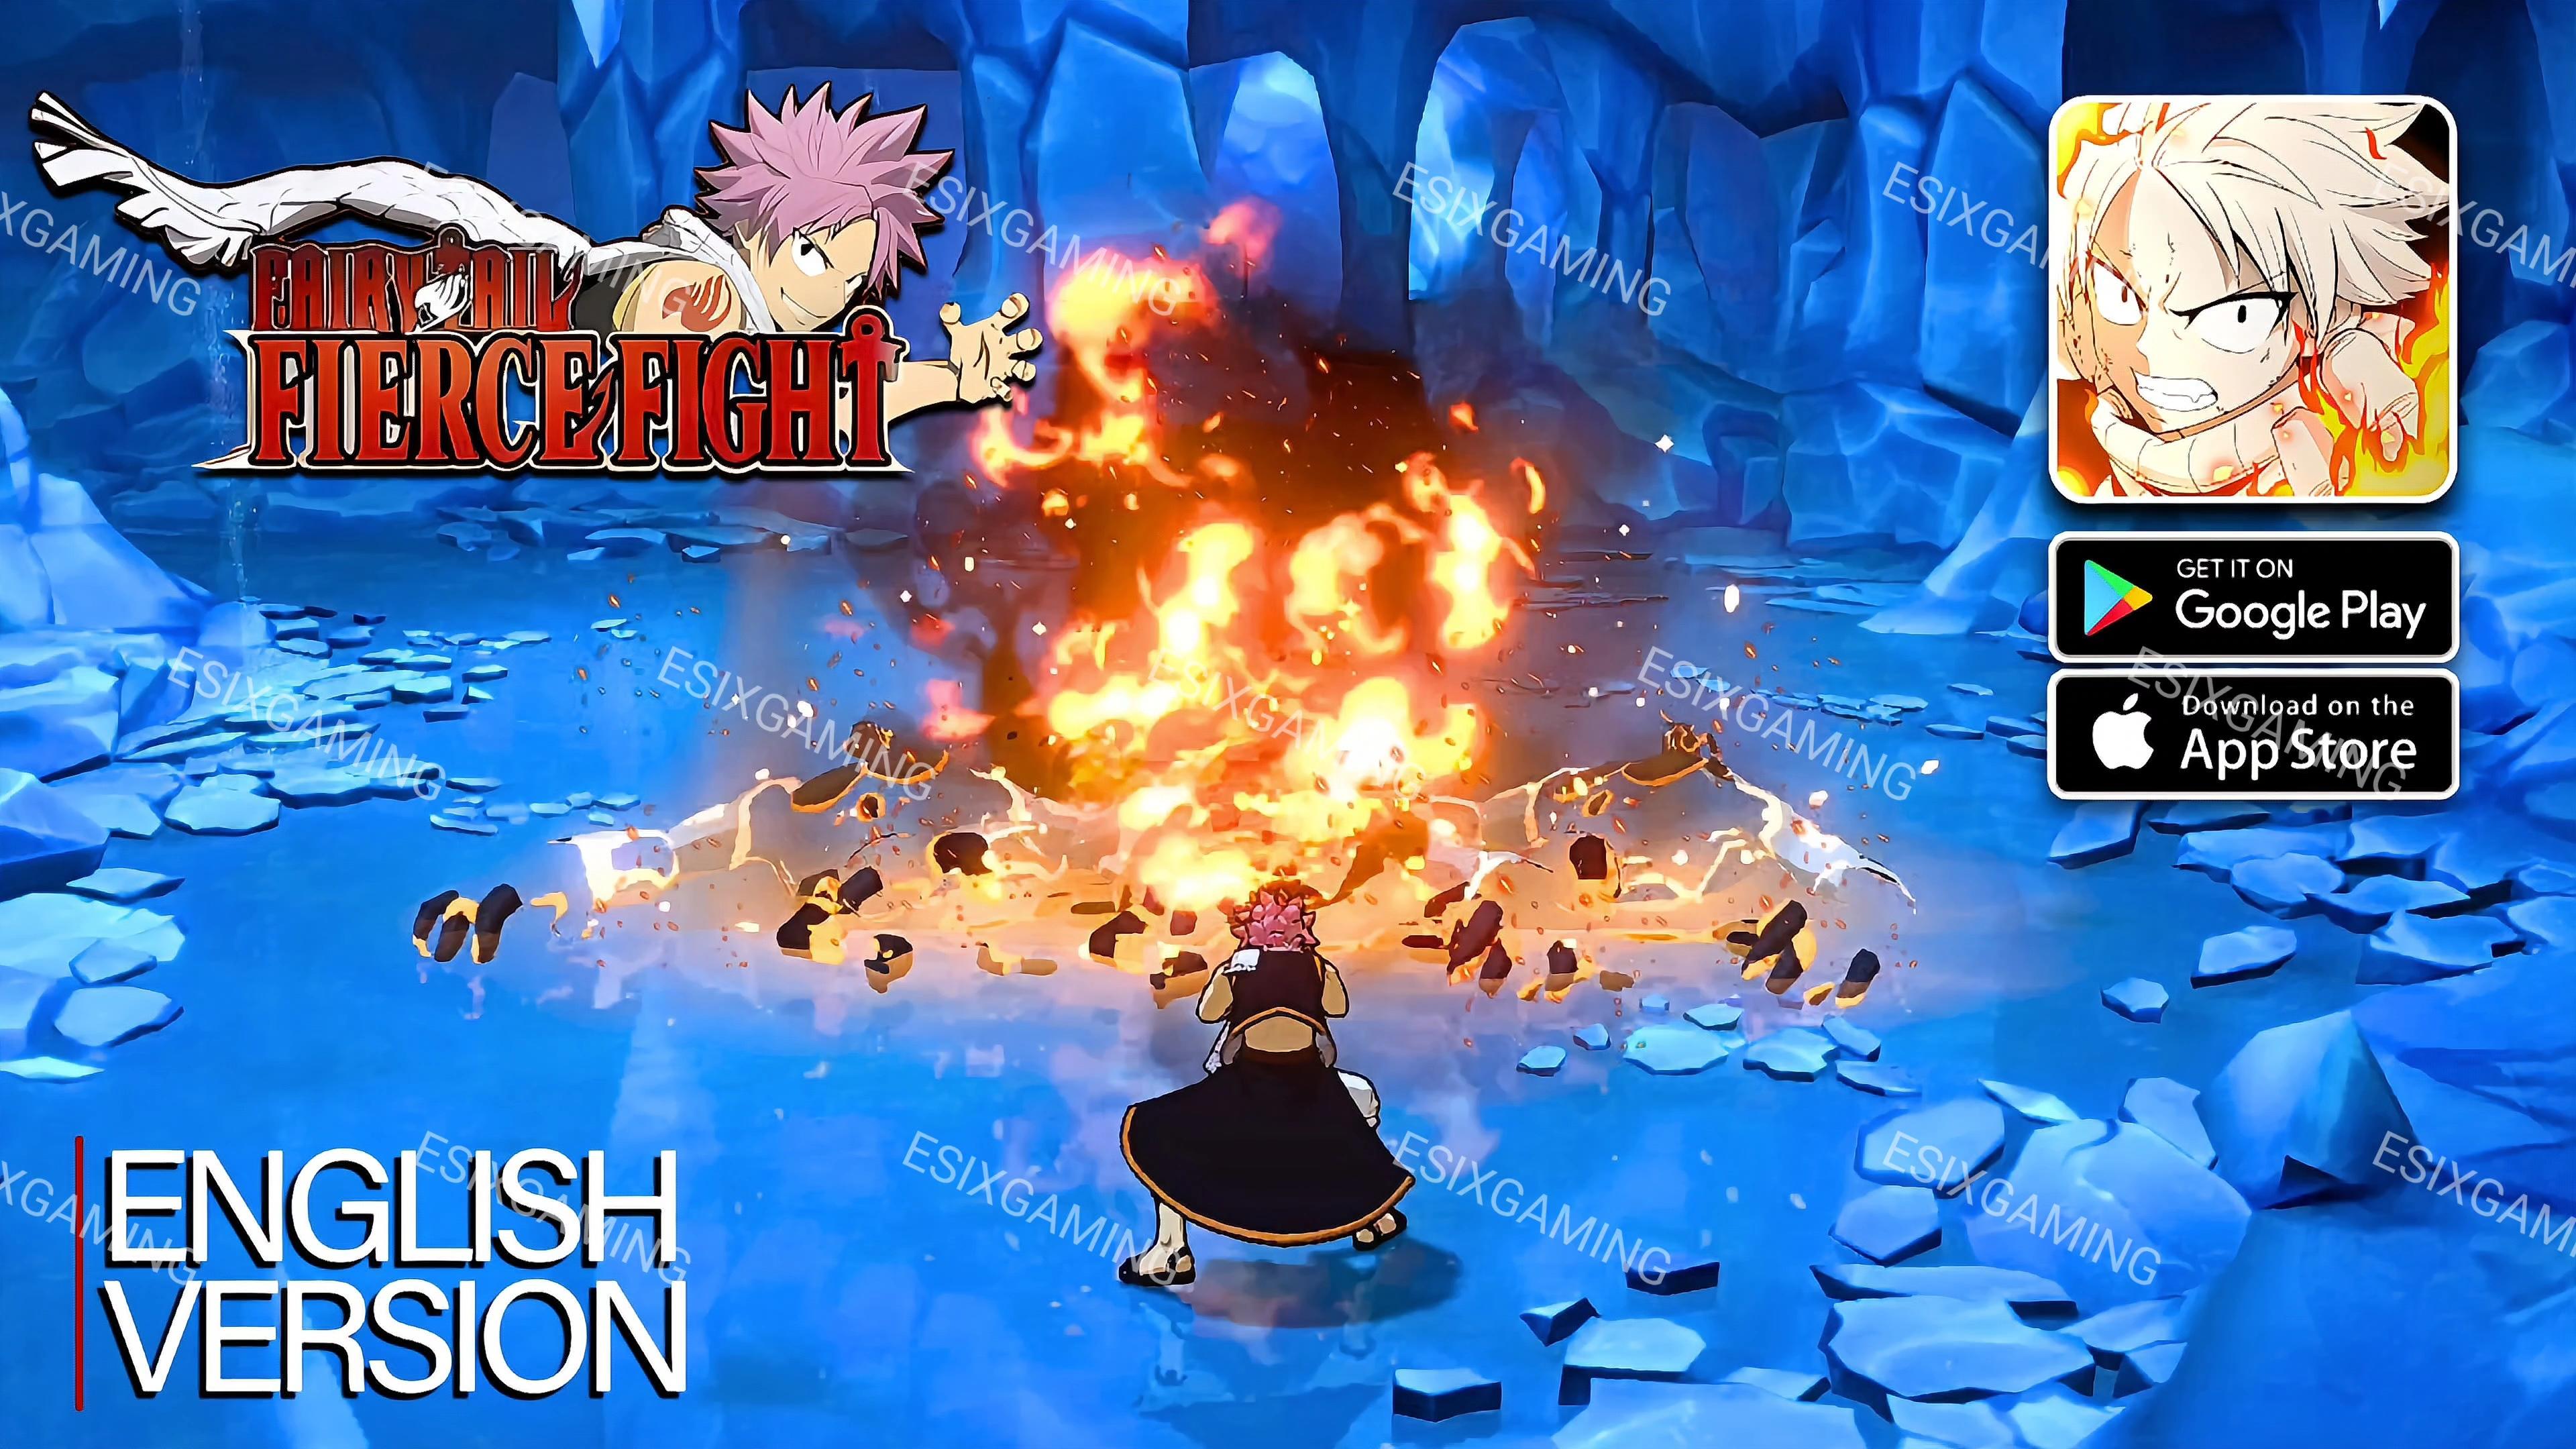 FAIRY TAIL: Fierce Fight - English Version Gameplay (Android/iOS)